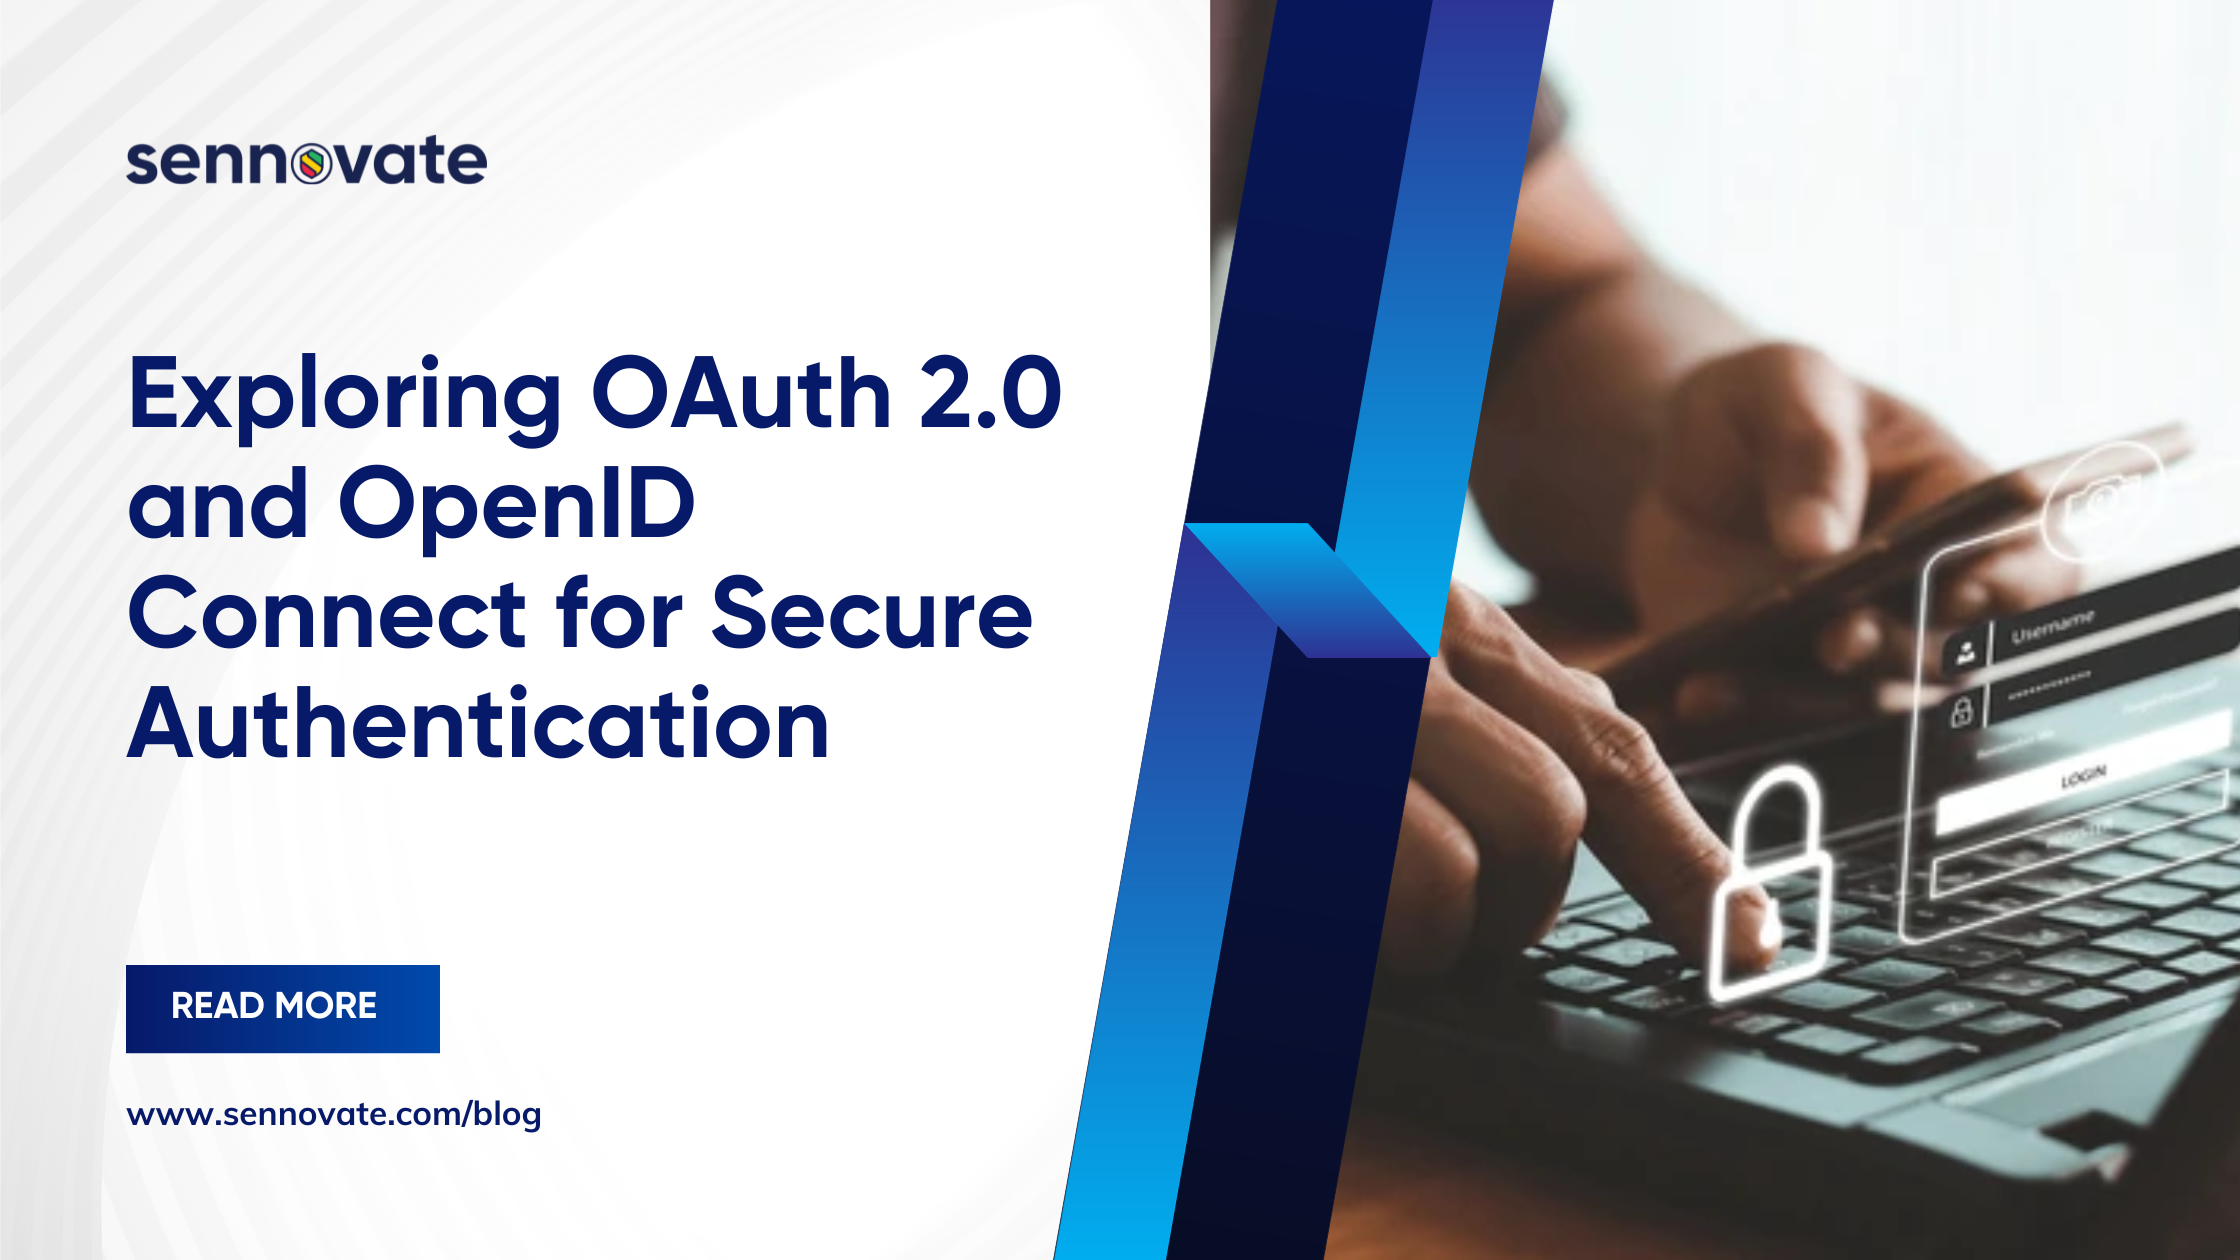 Oauth 2.0 and openID